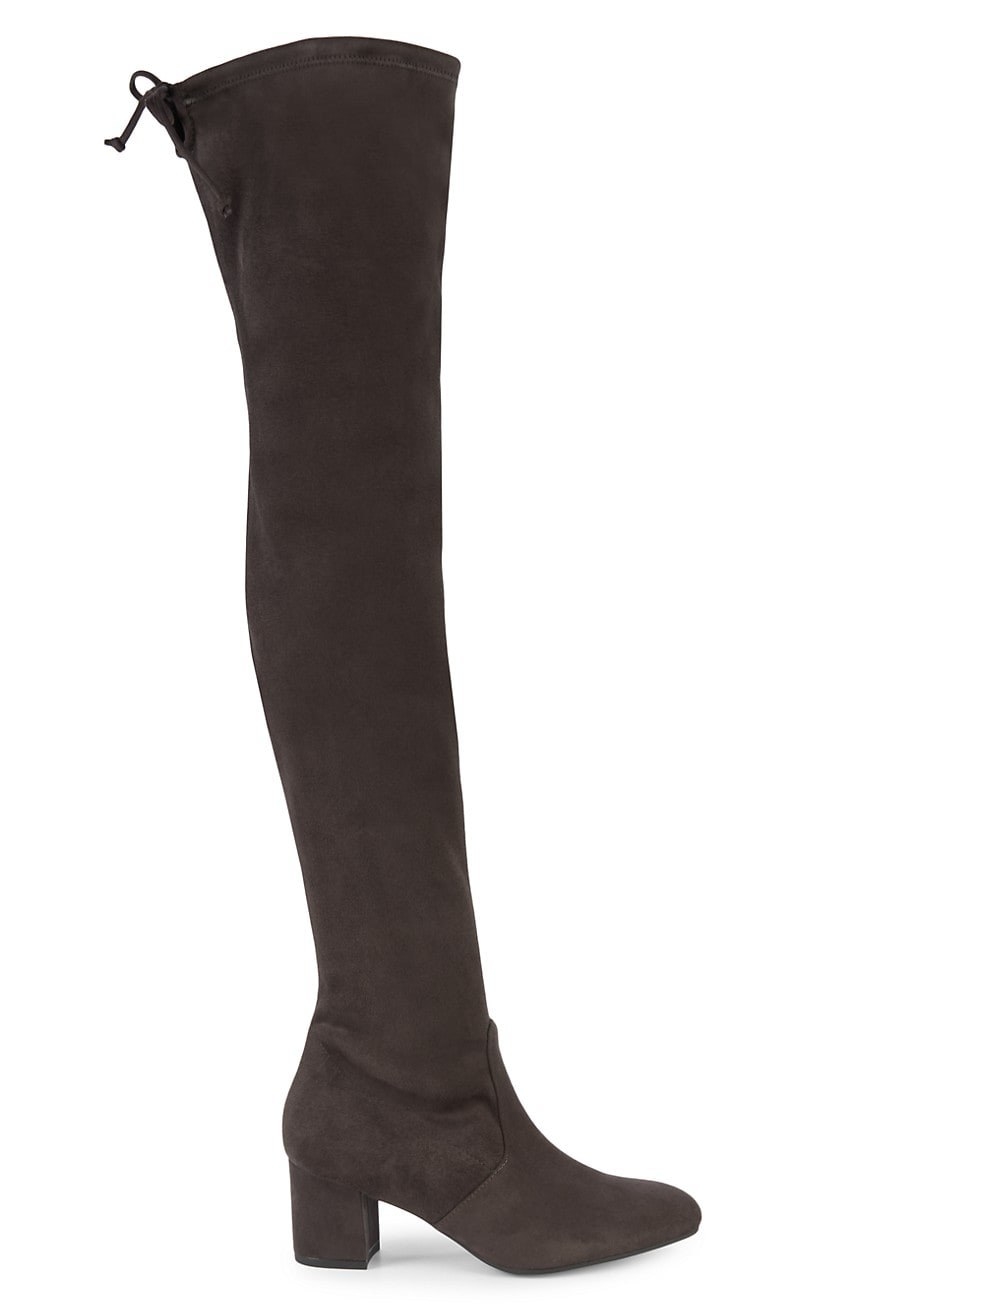 The black boots with drawstring at the top and a block heel